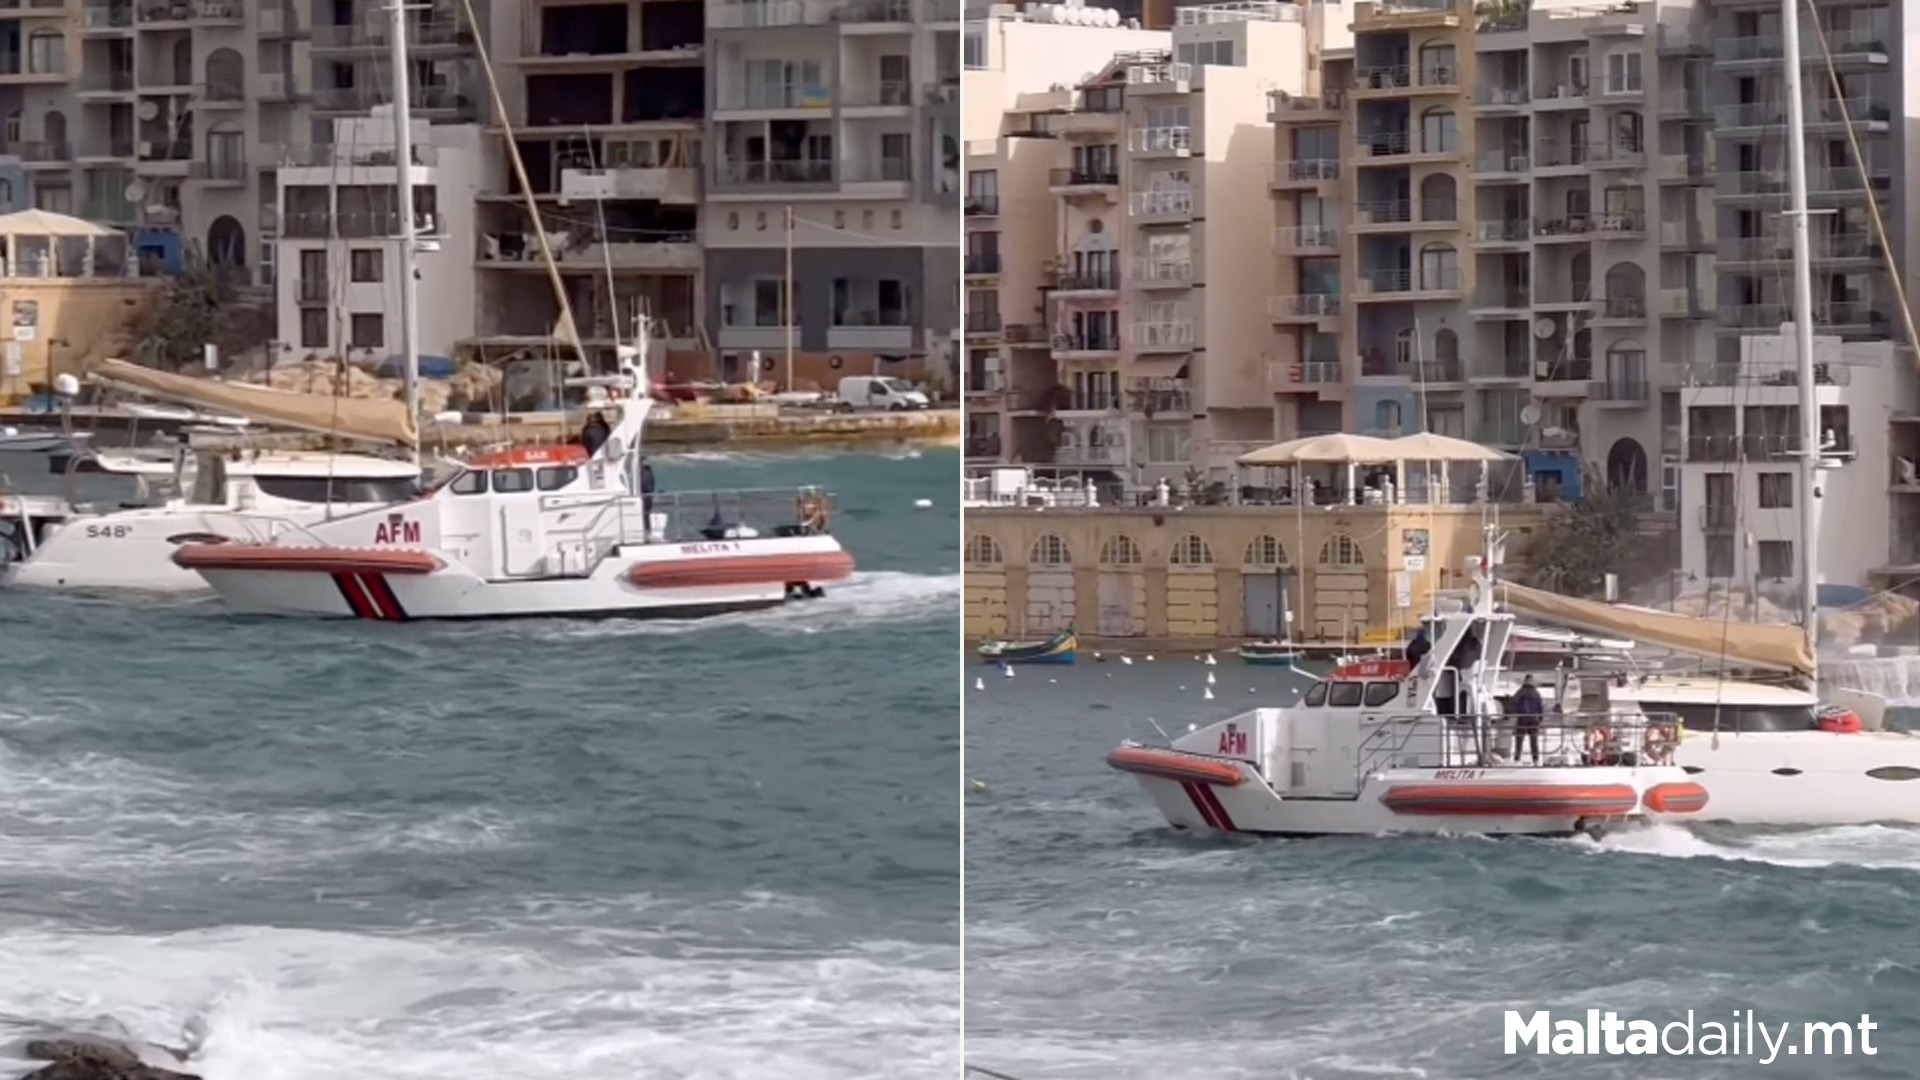 Drifting Anchored Boat Assisted By Armed Forces Of Malta